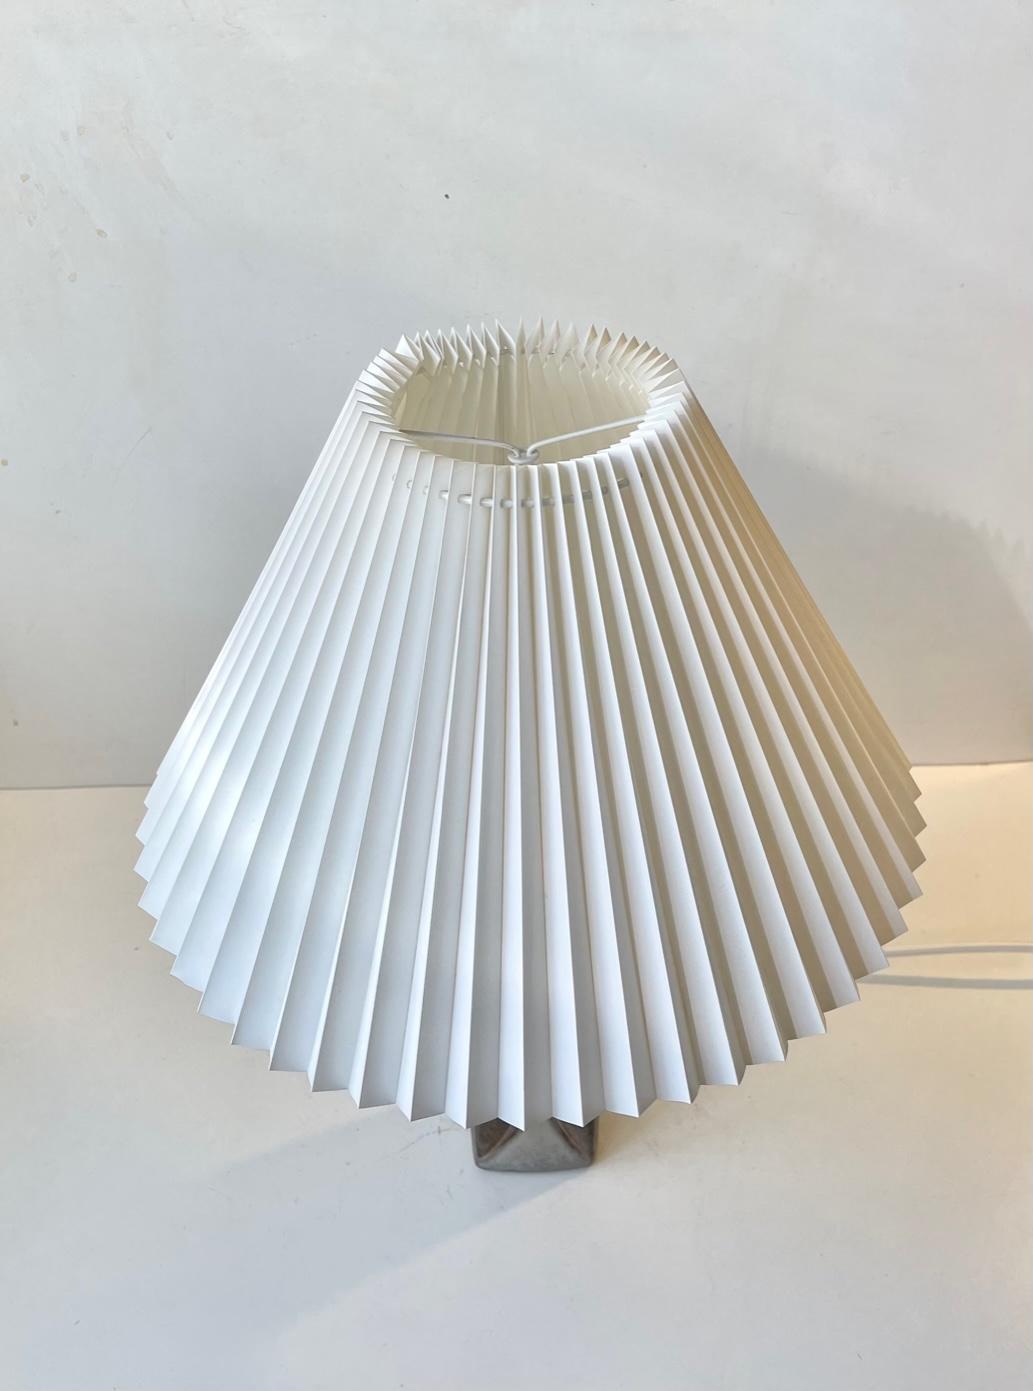 Danish Ceramic Table Lamp with Glazed Leaves by Marianne Starck for Michael Andersen For Sale